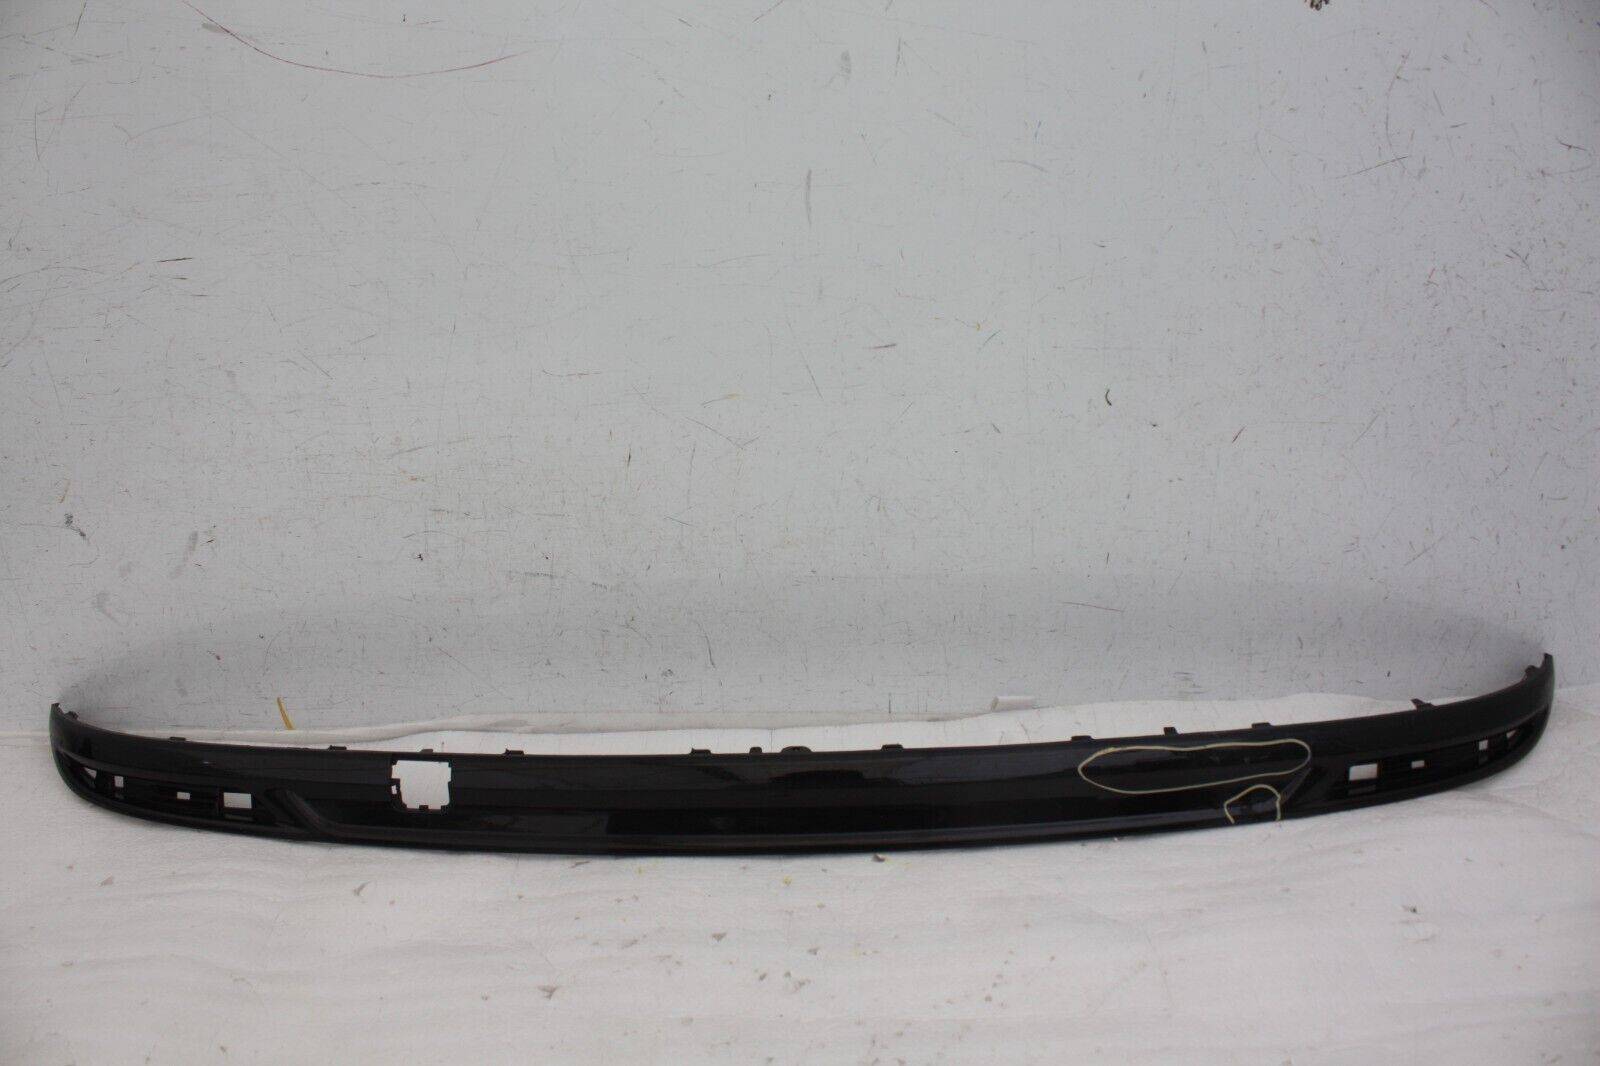 Ford Mondeo Rear Bumper Lower Section 2015 TO 2019 DS73 17K922 MAW DAMAGED 176416327783